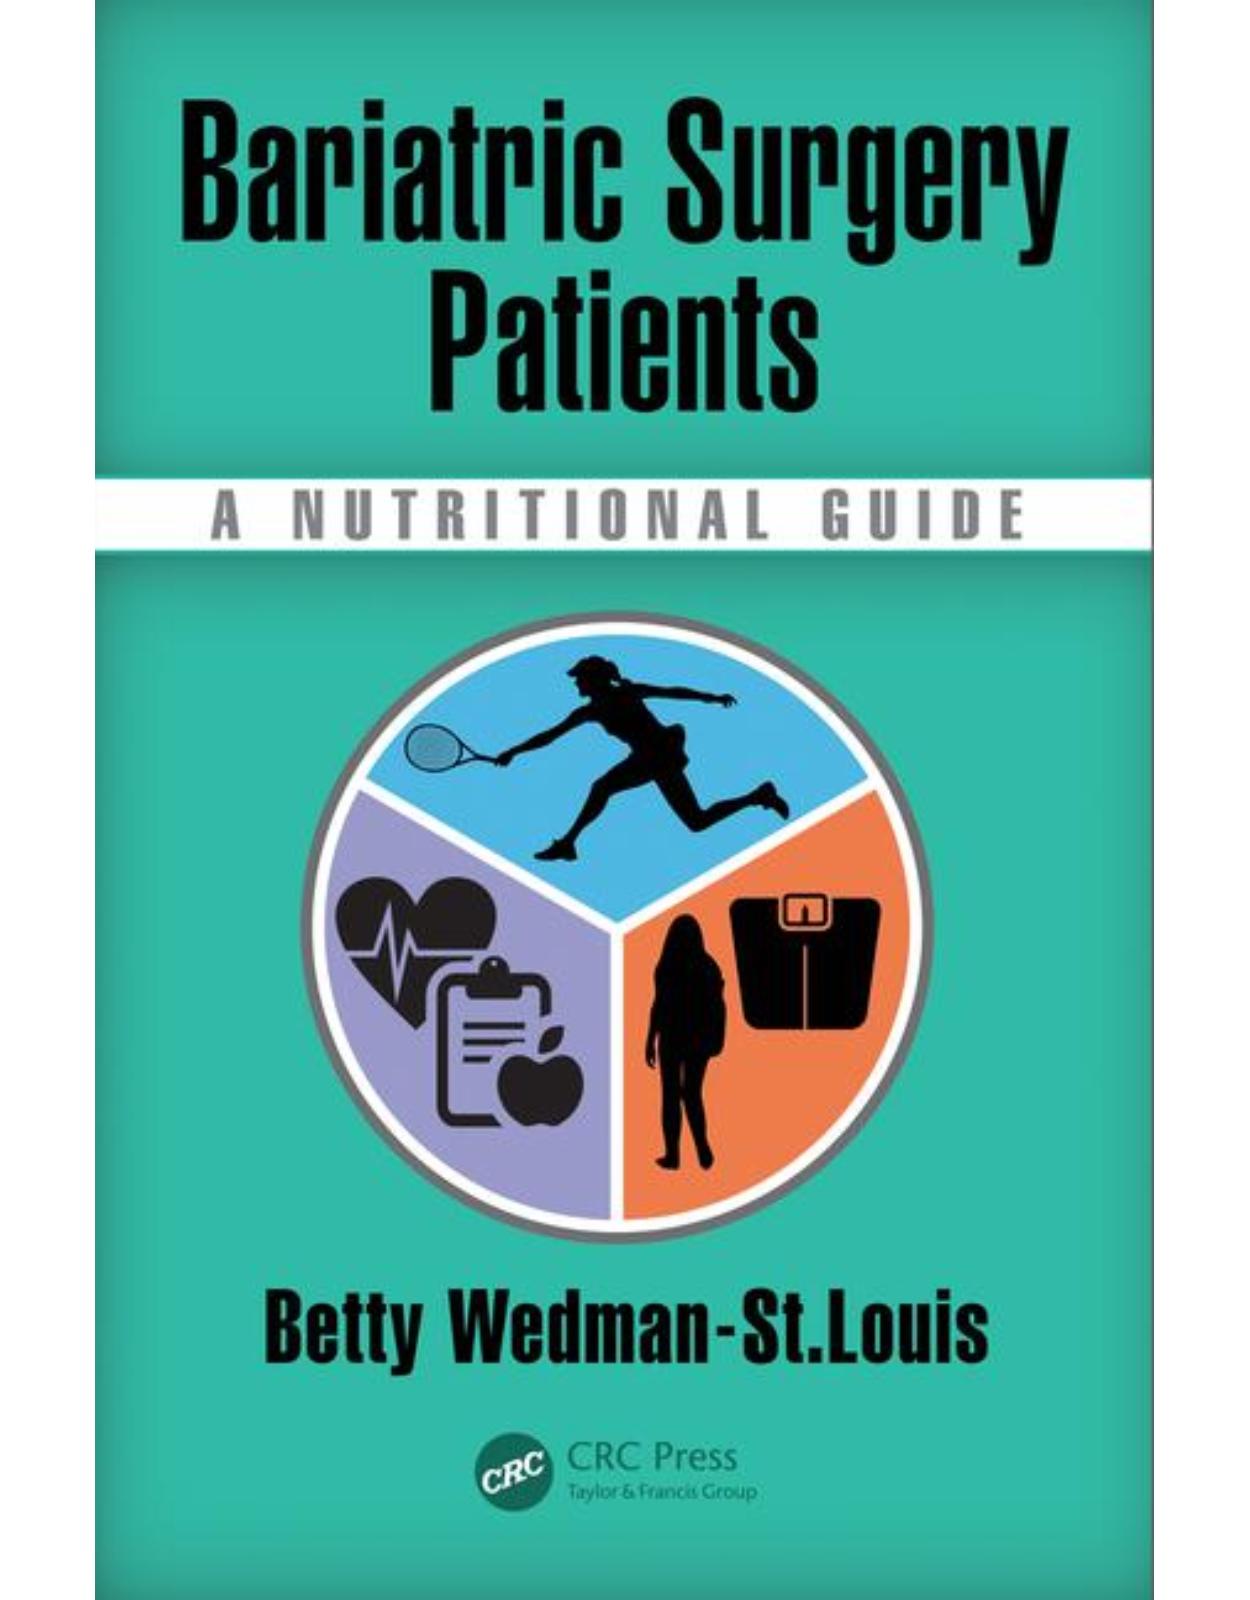 Bariatric Surgery Patients A Nutritional Guide